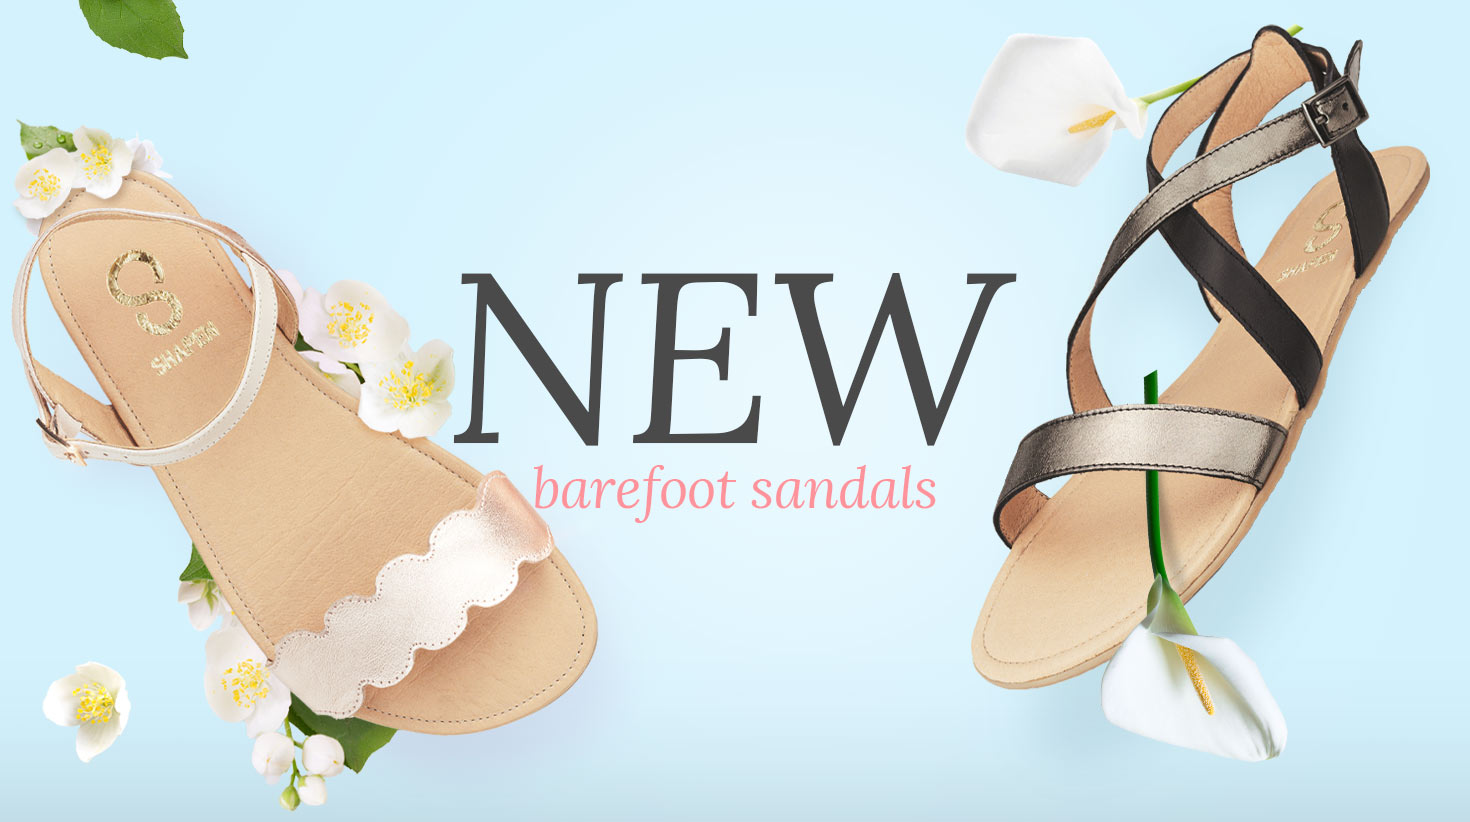 New barefoot sandals